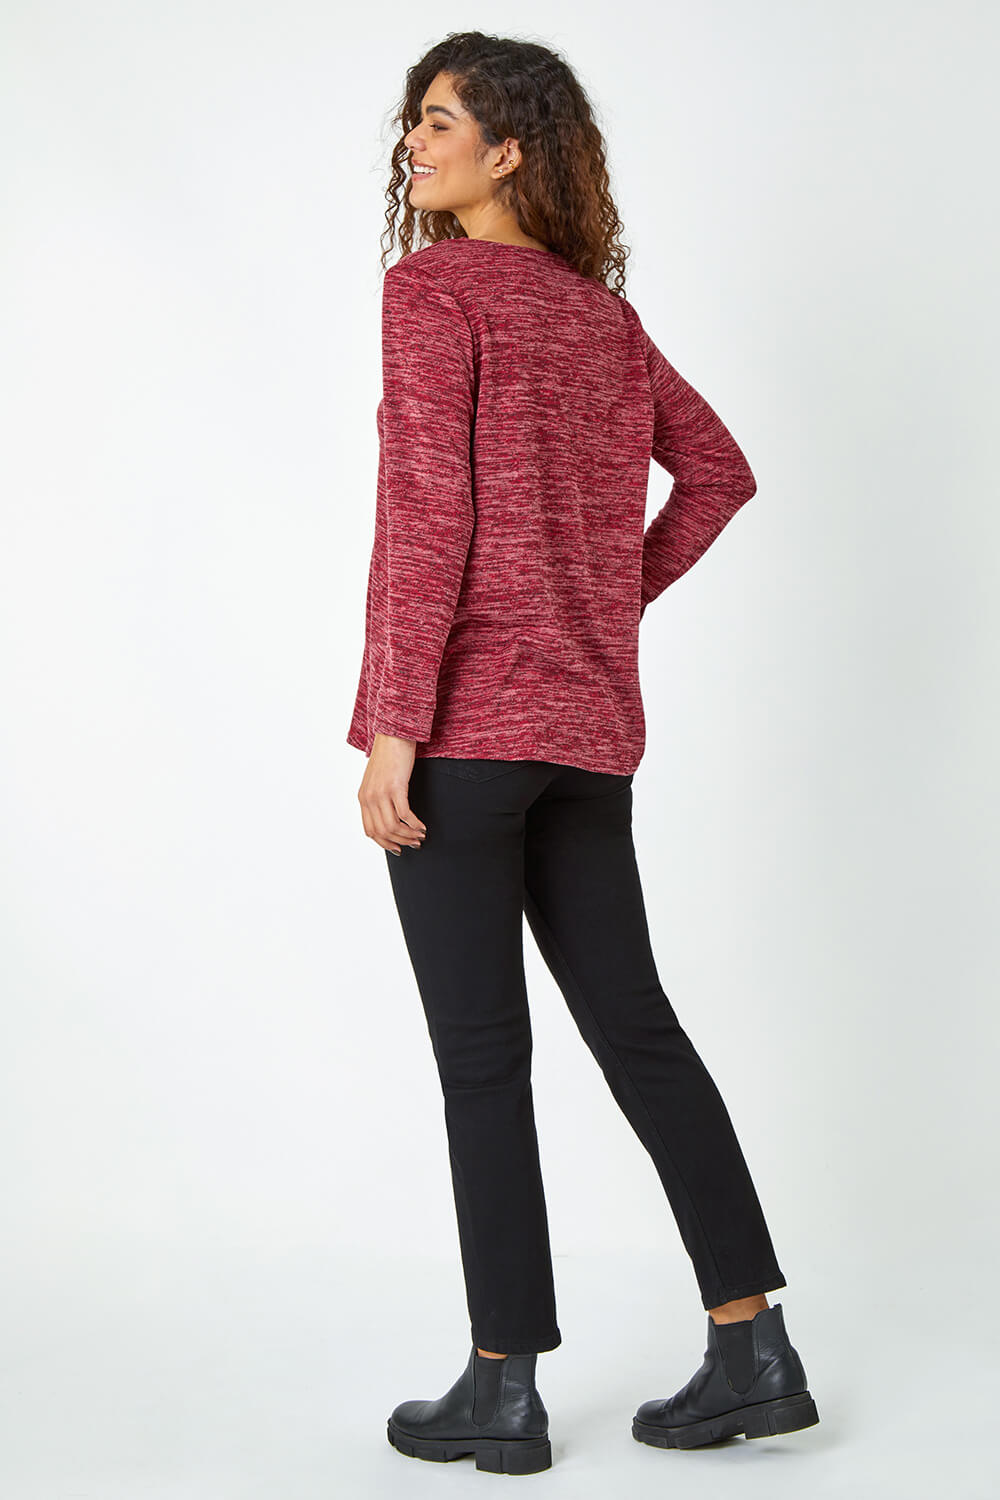 Maroon Button Stretch Knit Asymmetric Top, Image 3 of 5